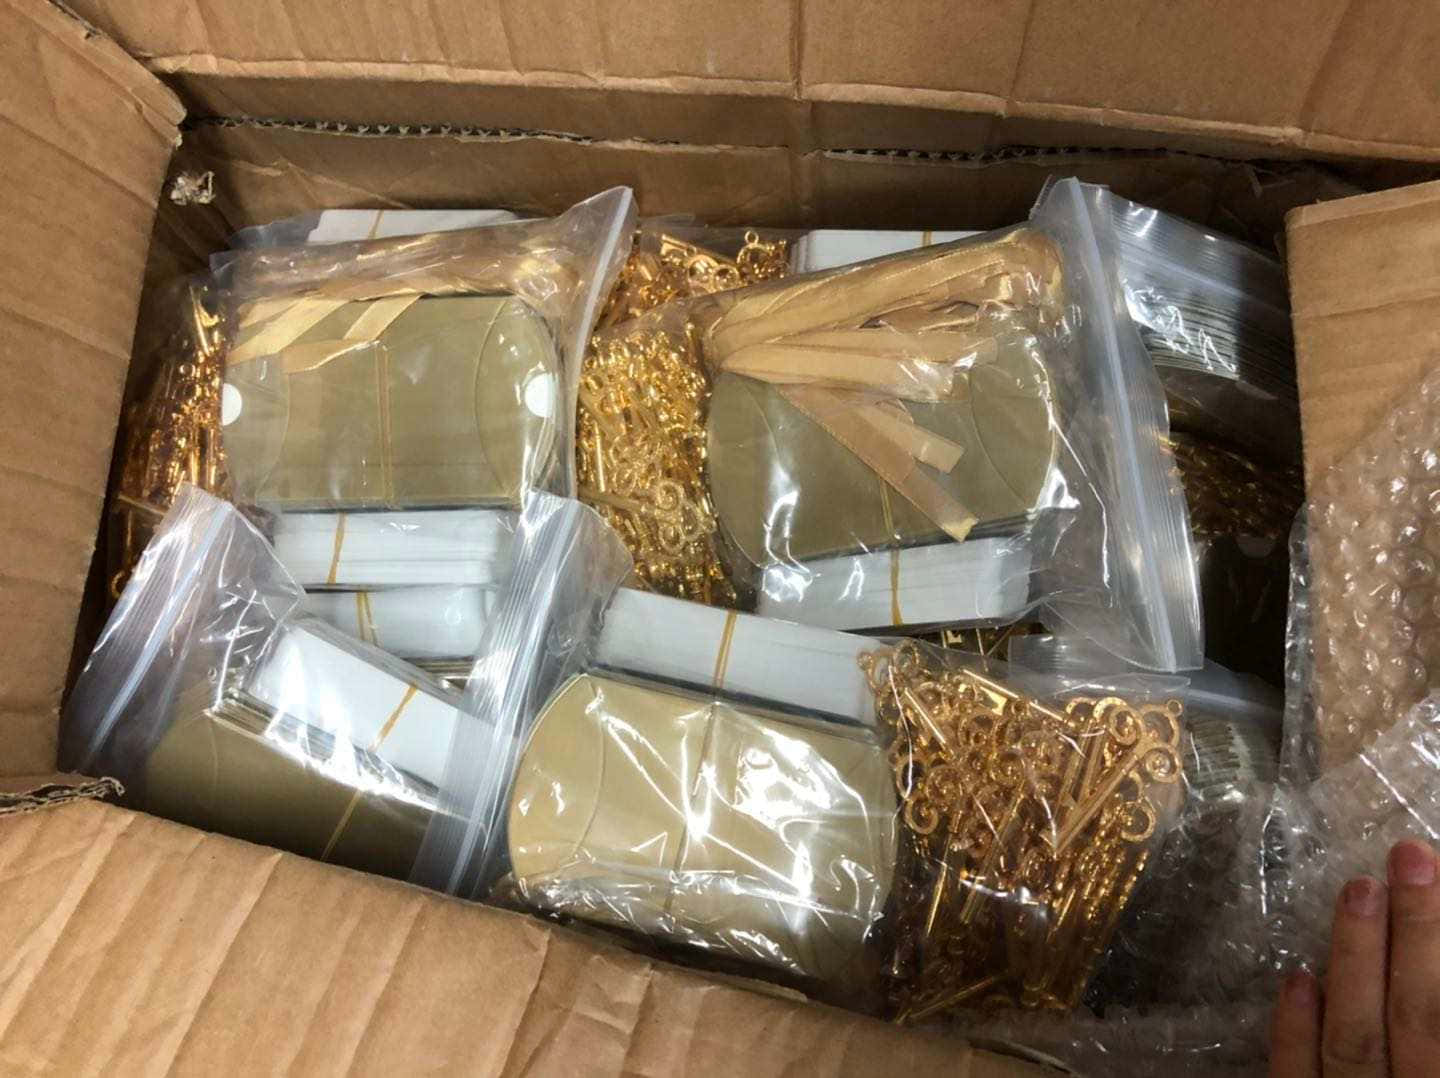 A Box Of Gold Wires In A Box